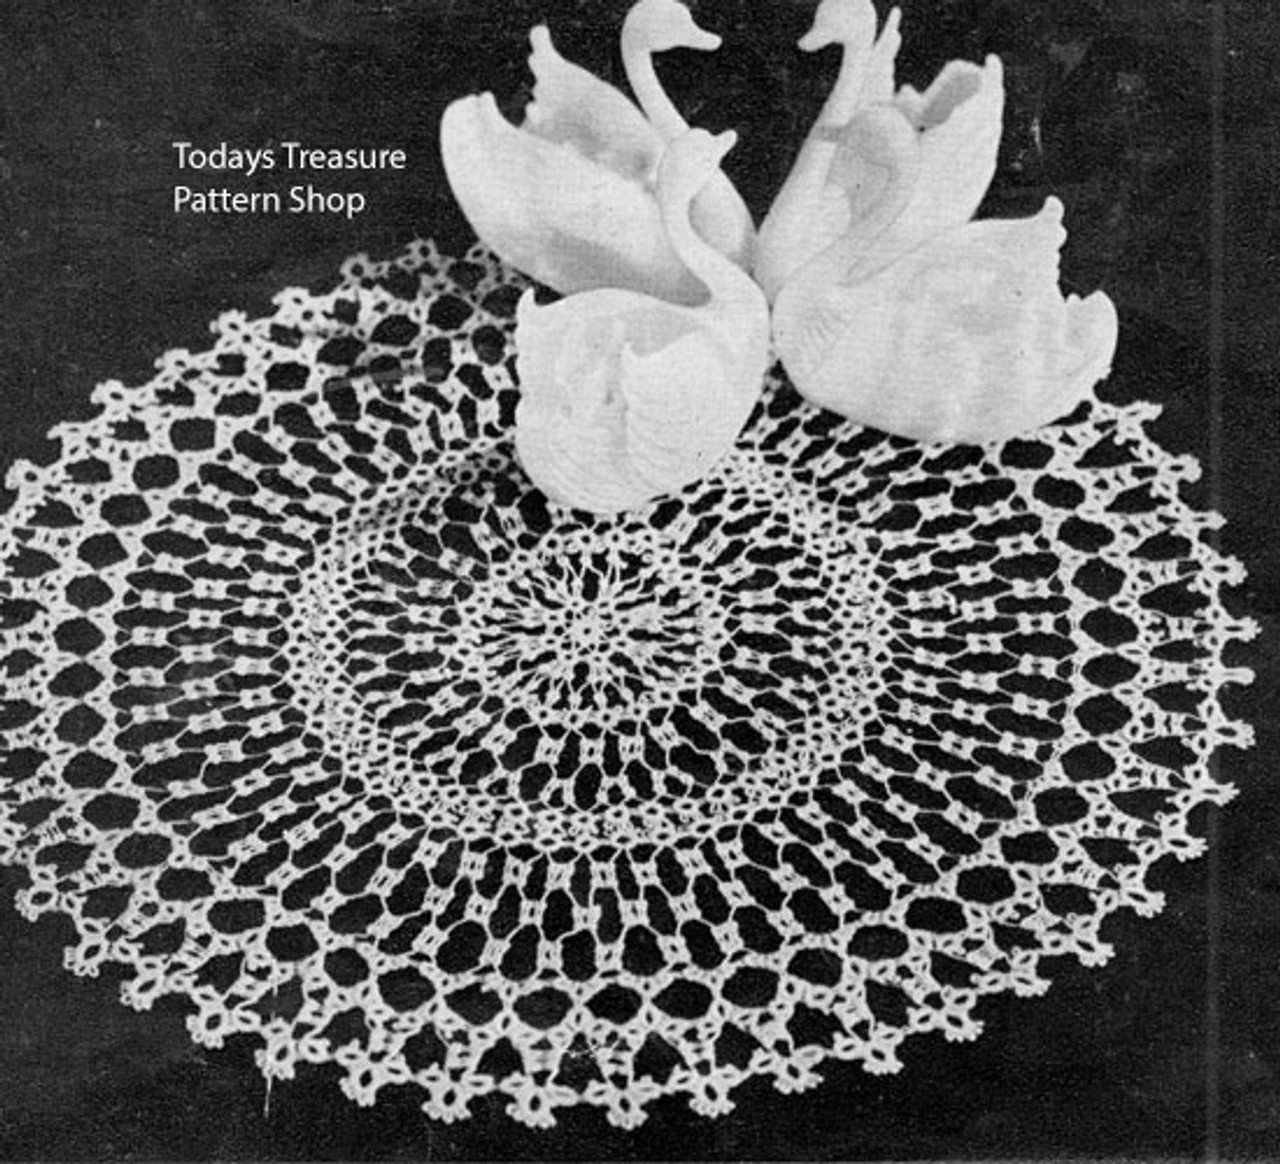 Vintage Tatted Doily Pattern from American Thread